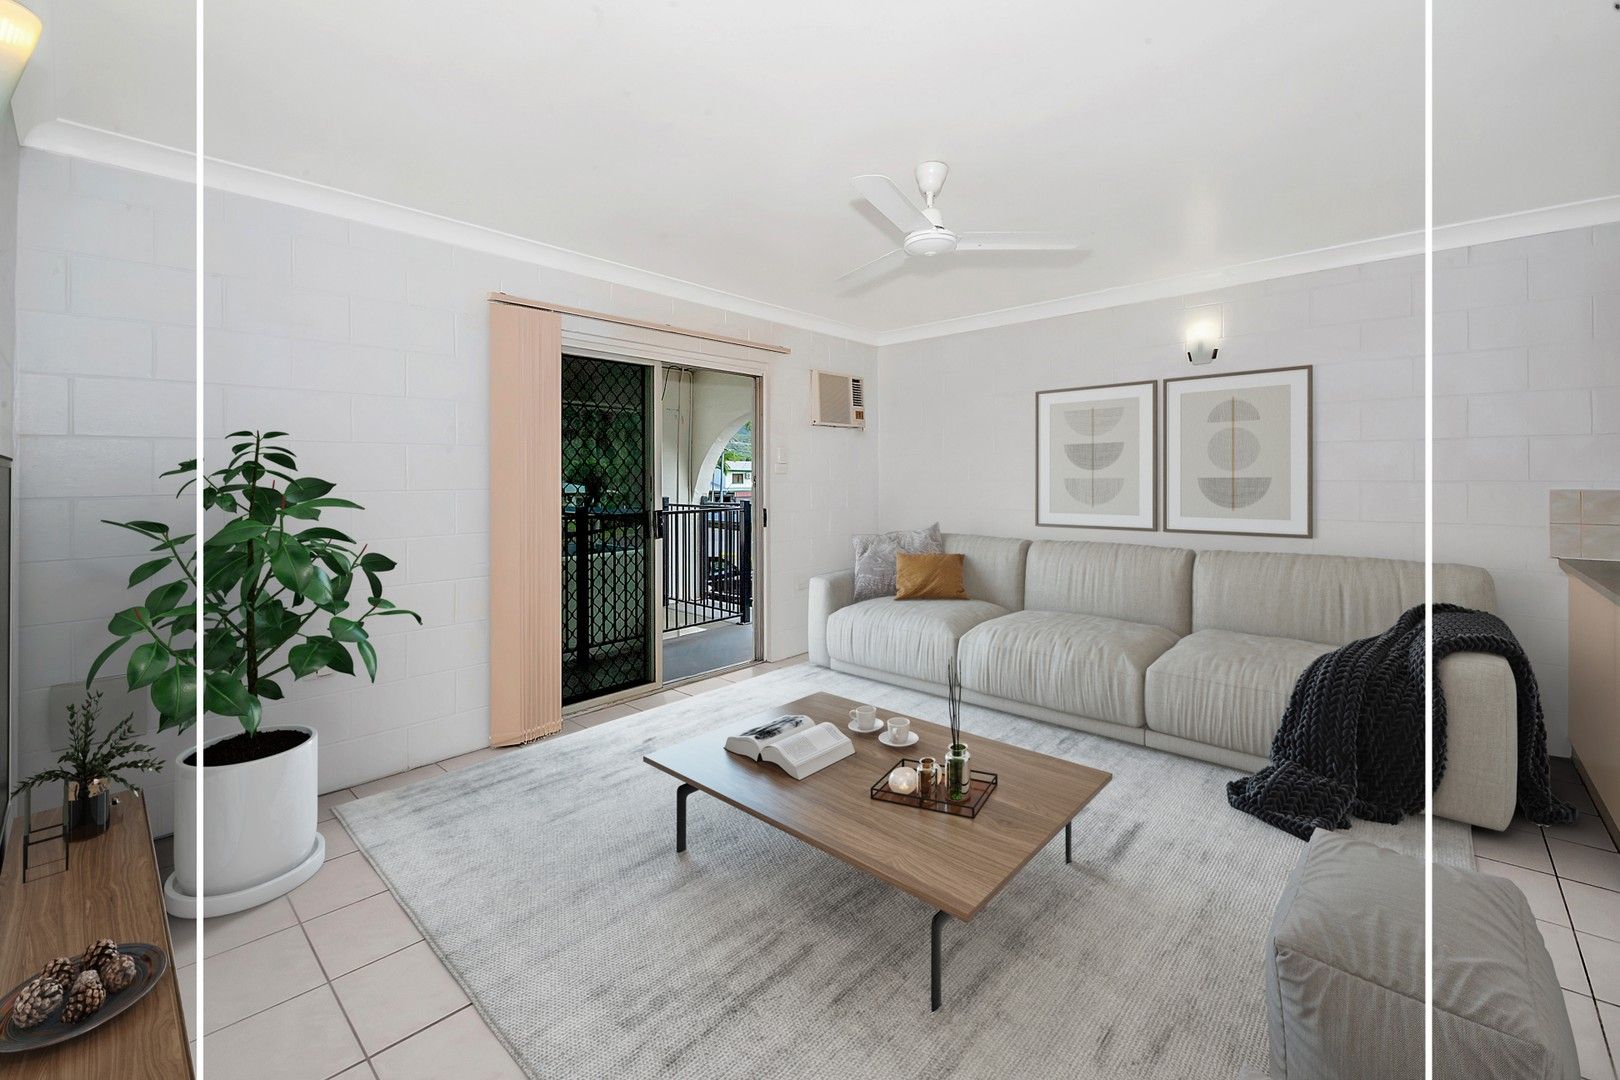 2 bedrooms Apartment / Unit / Flat in 8/58 Boden Street EDGE HILL QLD, 4870